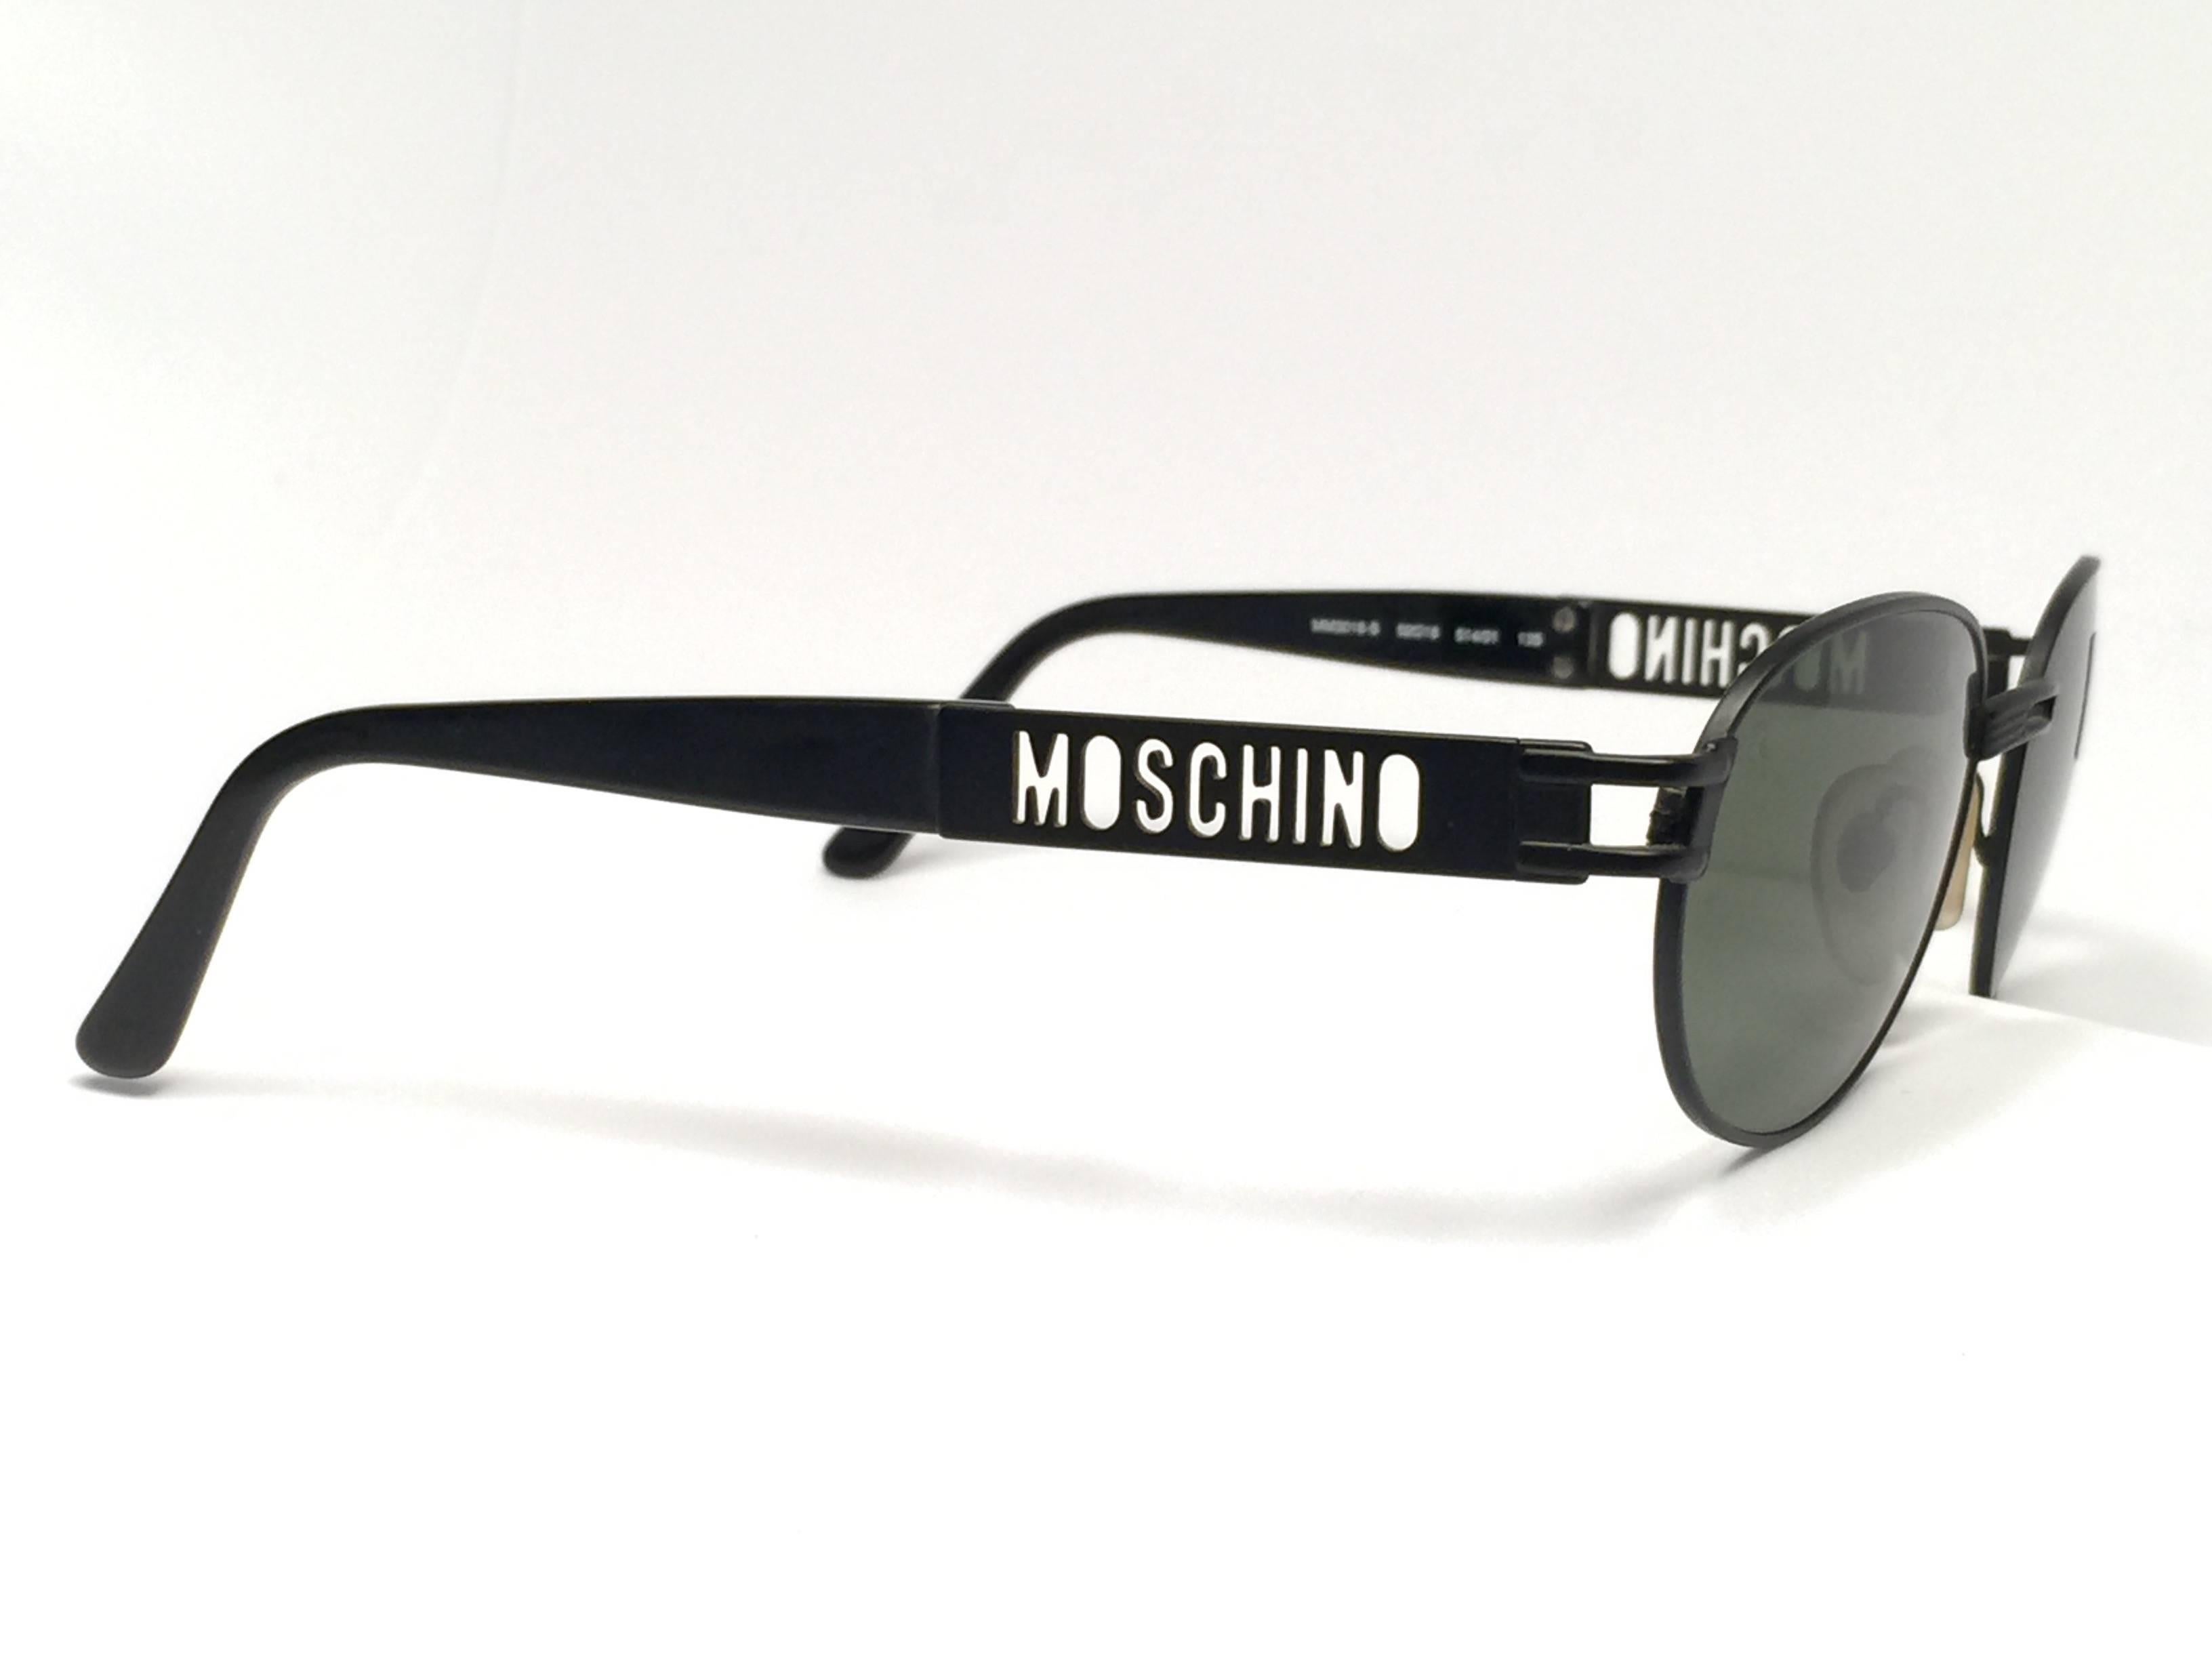 New Vintage Moschino small oval black matte frame with G15 Grey lenses.

Made in Italy.
 
Produced and design in 1990's.

New, never worn or displayed.
